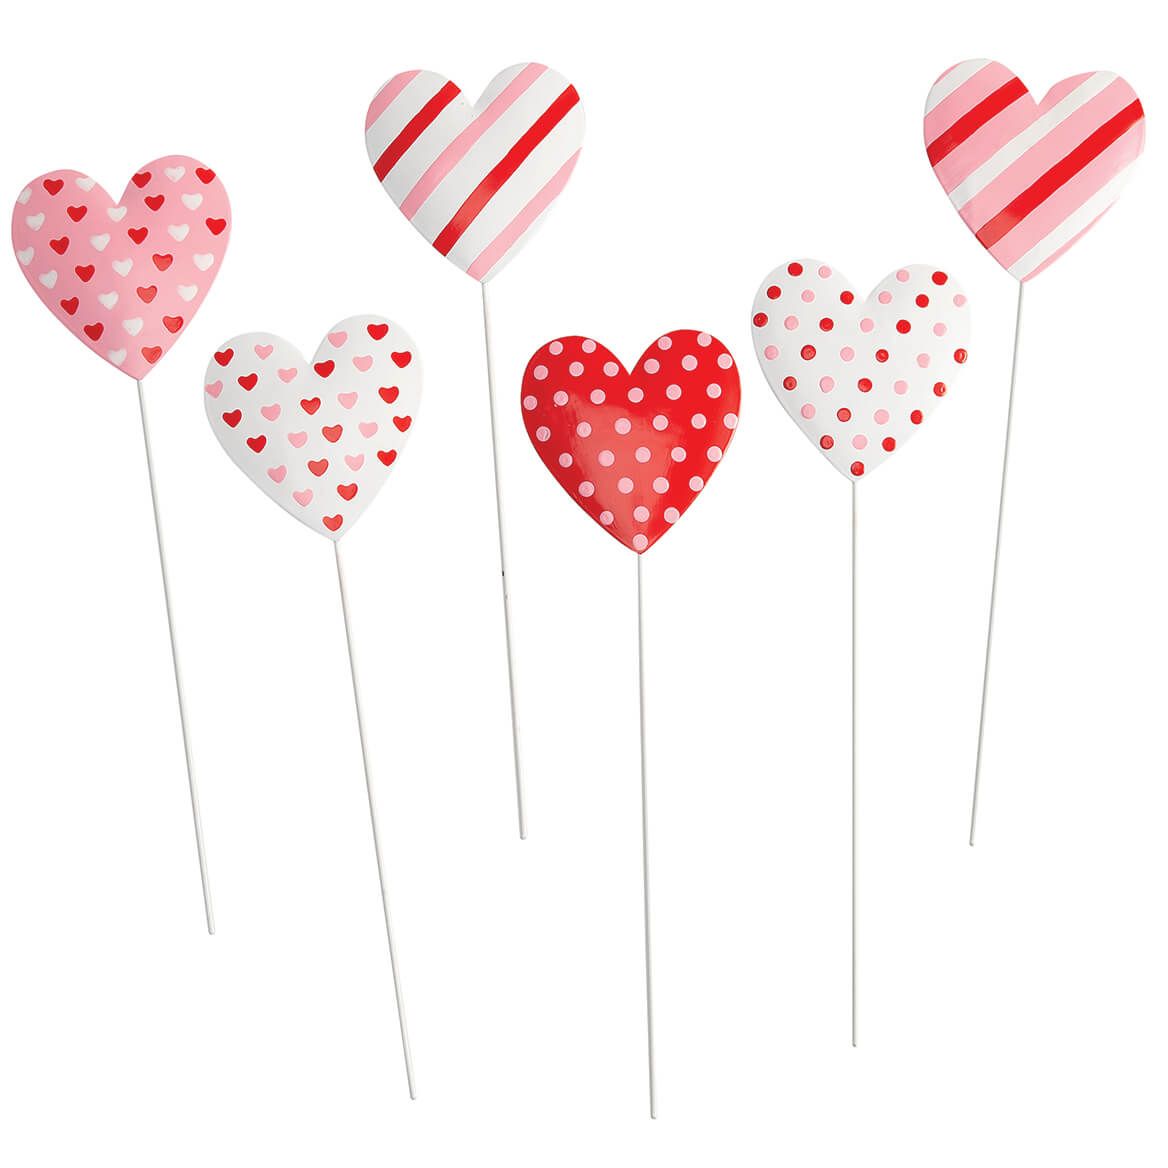 Mini Metal Heart Stakes, Set of 6 by Fox River™ Creations + '-' + 376489